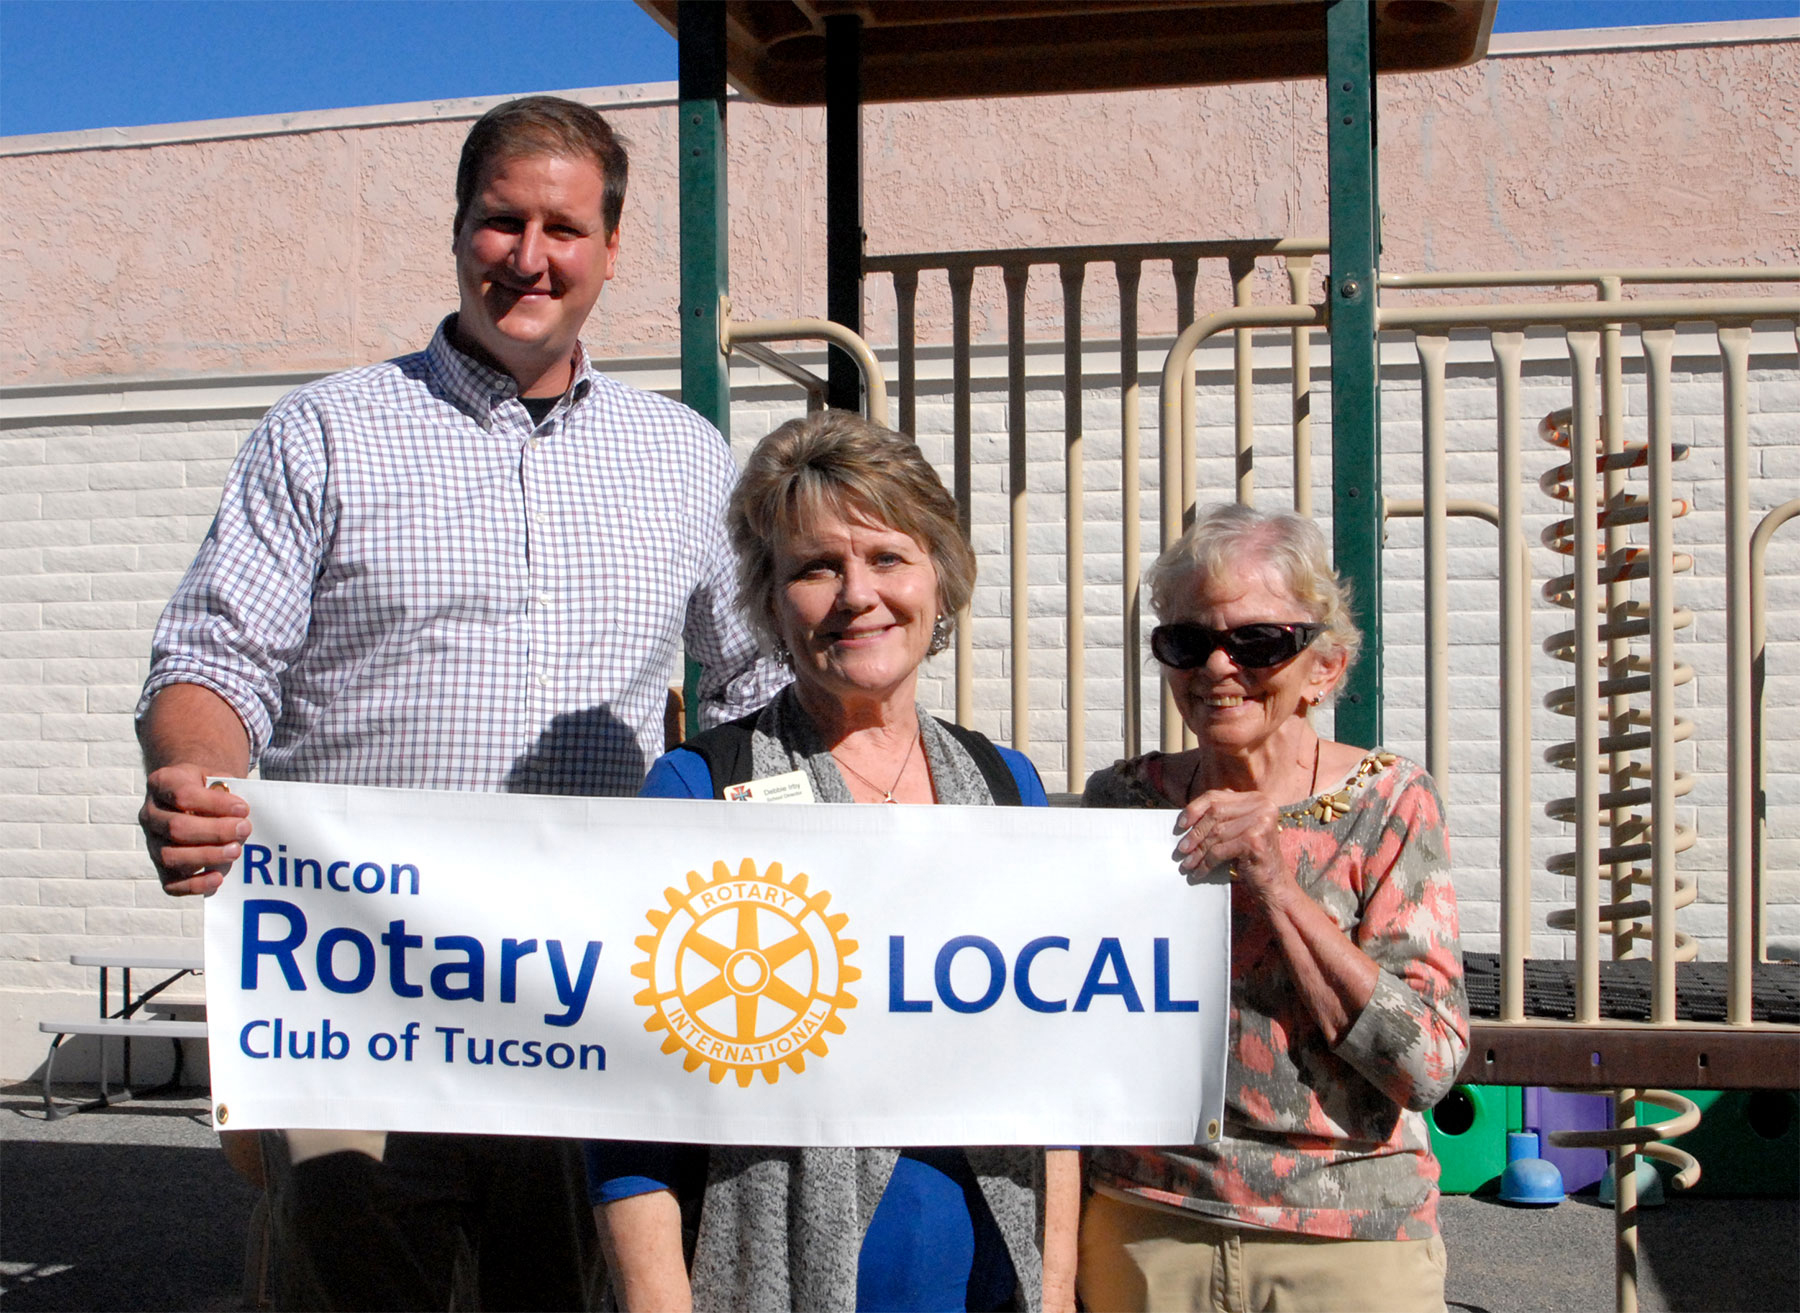 Rincon Rotary helps Tanque Verde Lutheran upgrade their playground through the Rotary Local program.